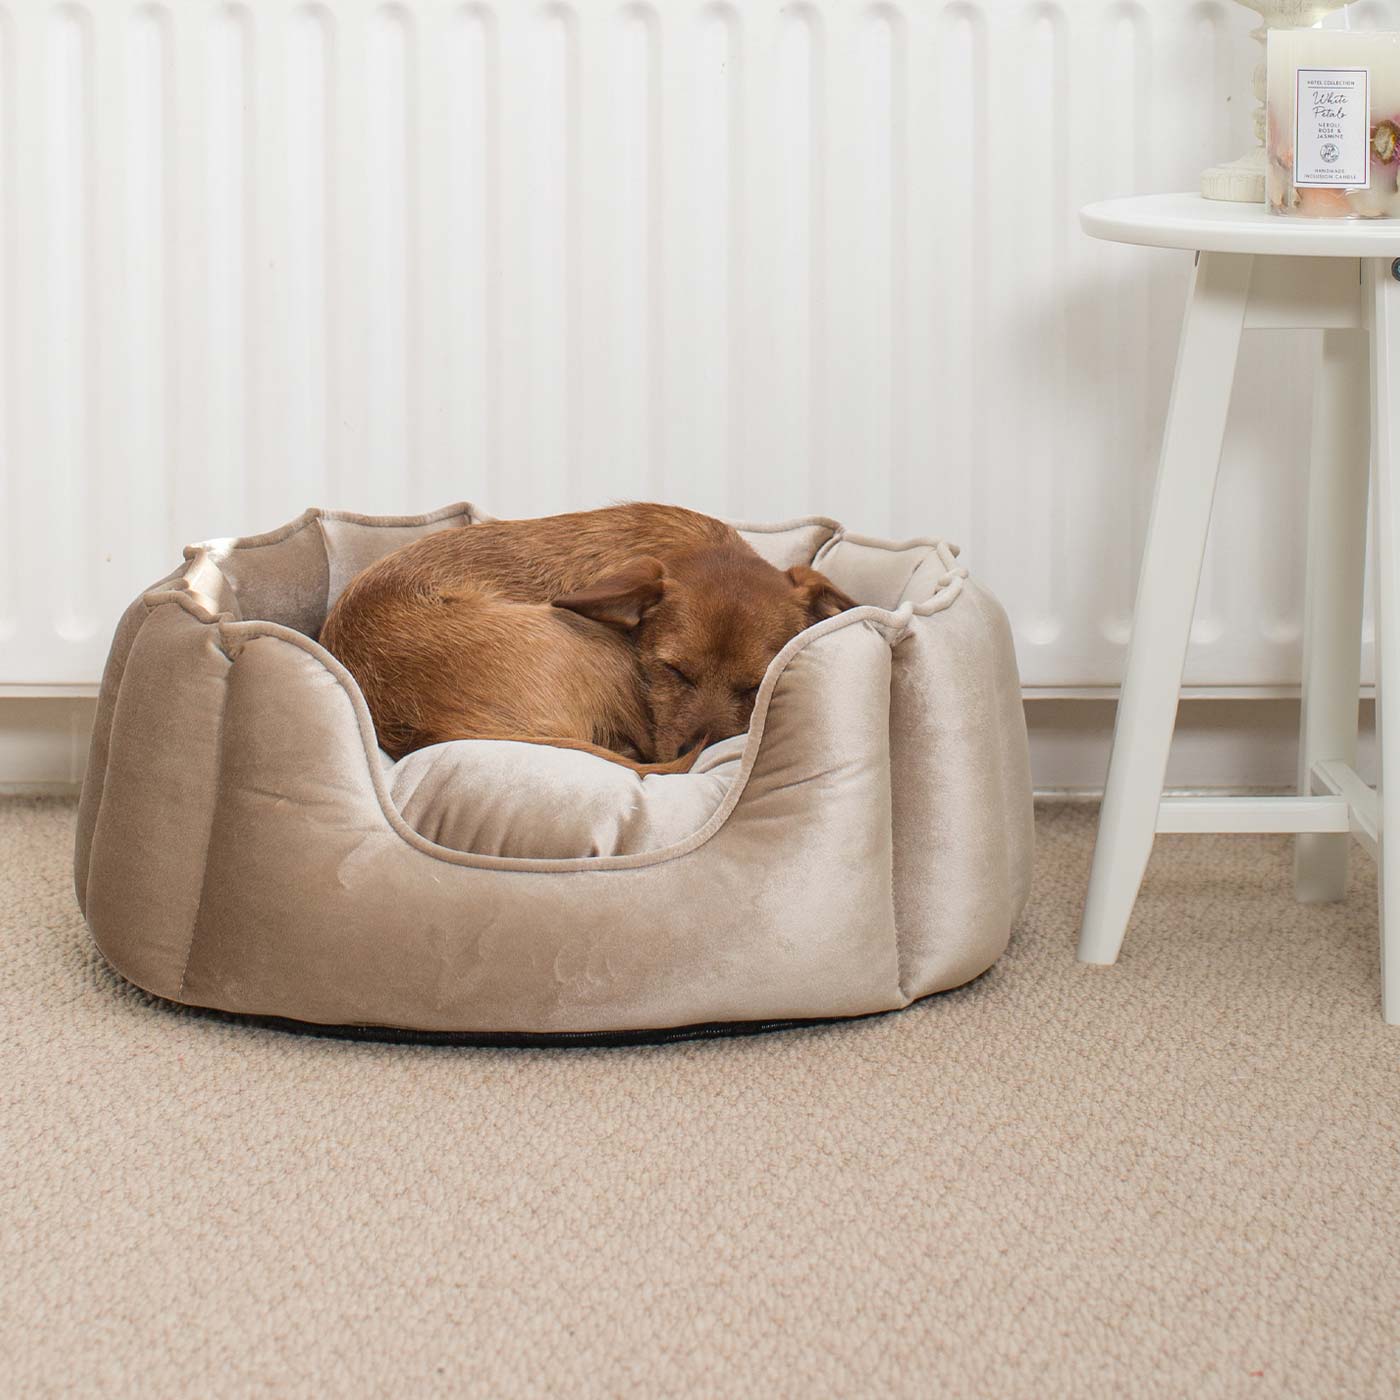 Discover Our Luxurious High Wall Velvet Bed For Dogs, Featuring inner pillow with plush teddy fleece on one side To Craft The Perfect Dogs Bed In Stunning Mushroom Velvet! Available To Personalise Now at Lords & Labradors 